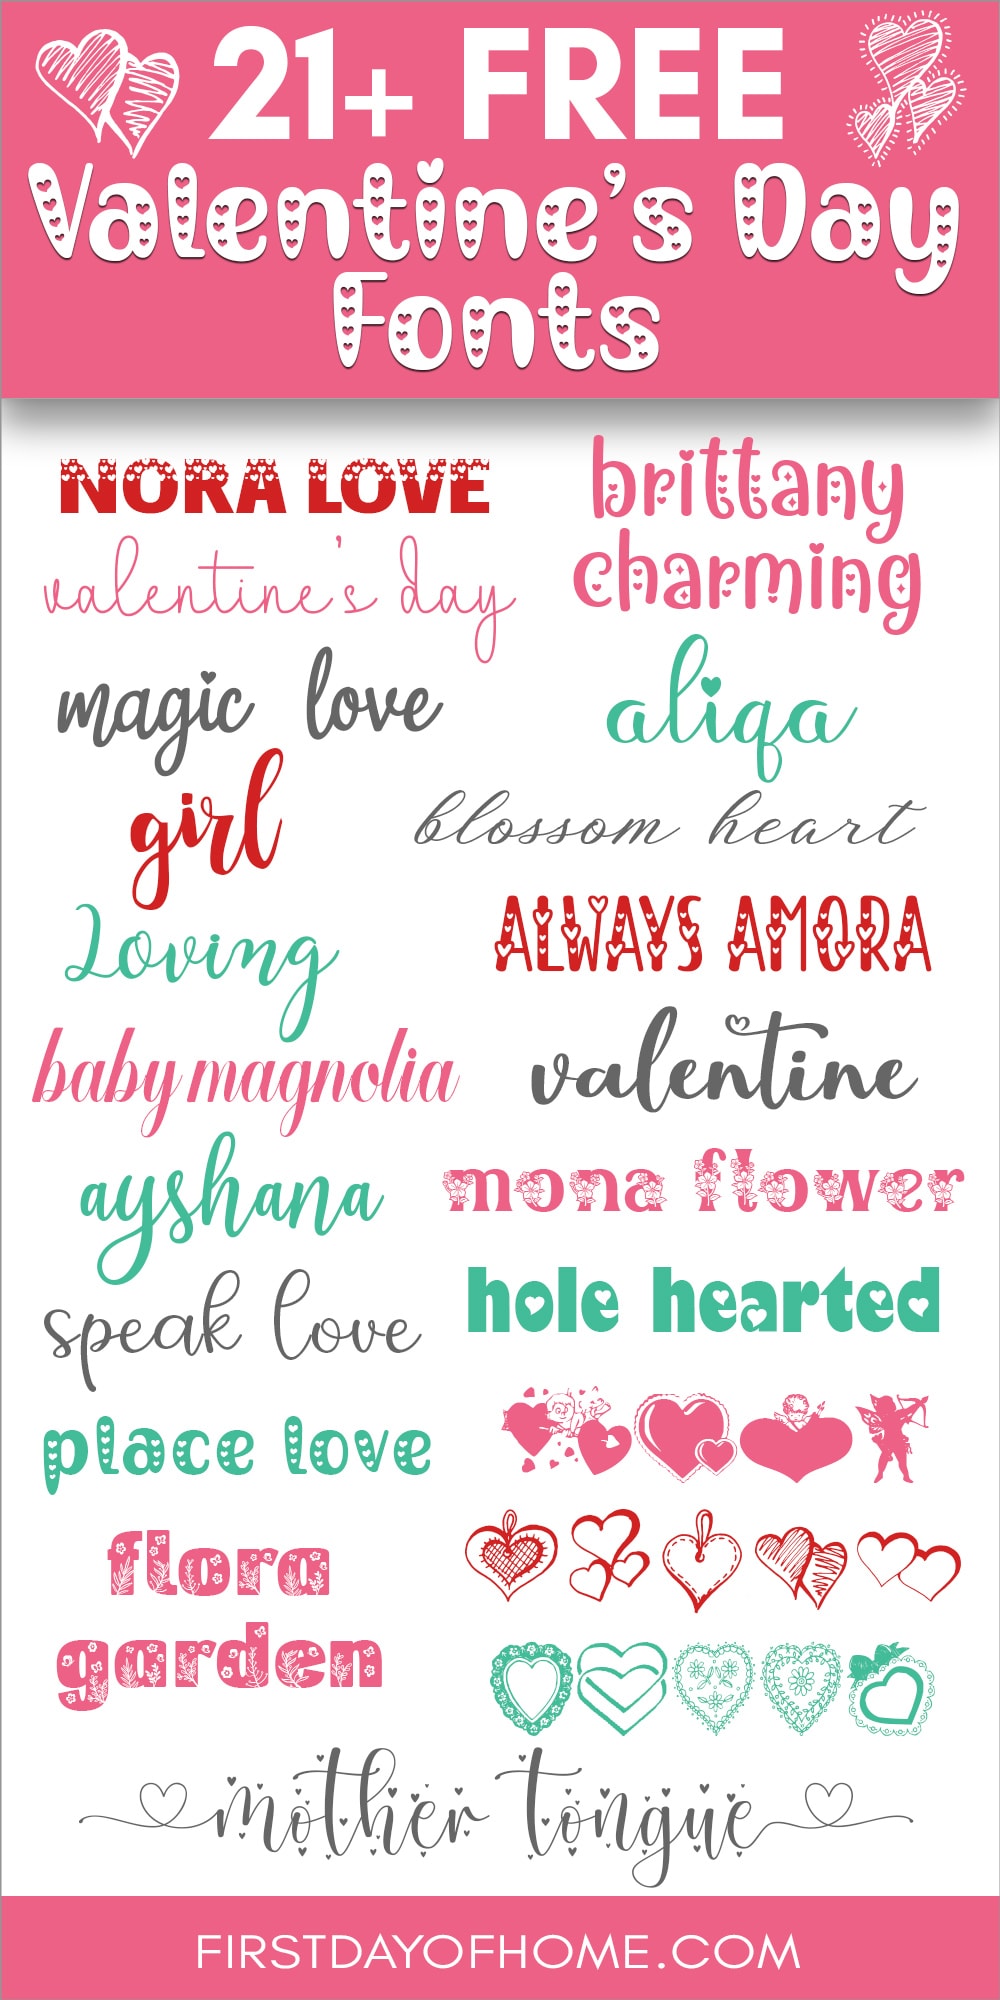 Collection of various free Valentine's Day fonts with text overlay reading "21+ Free Valentine's Day Fonts".